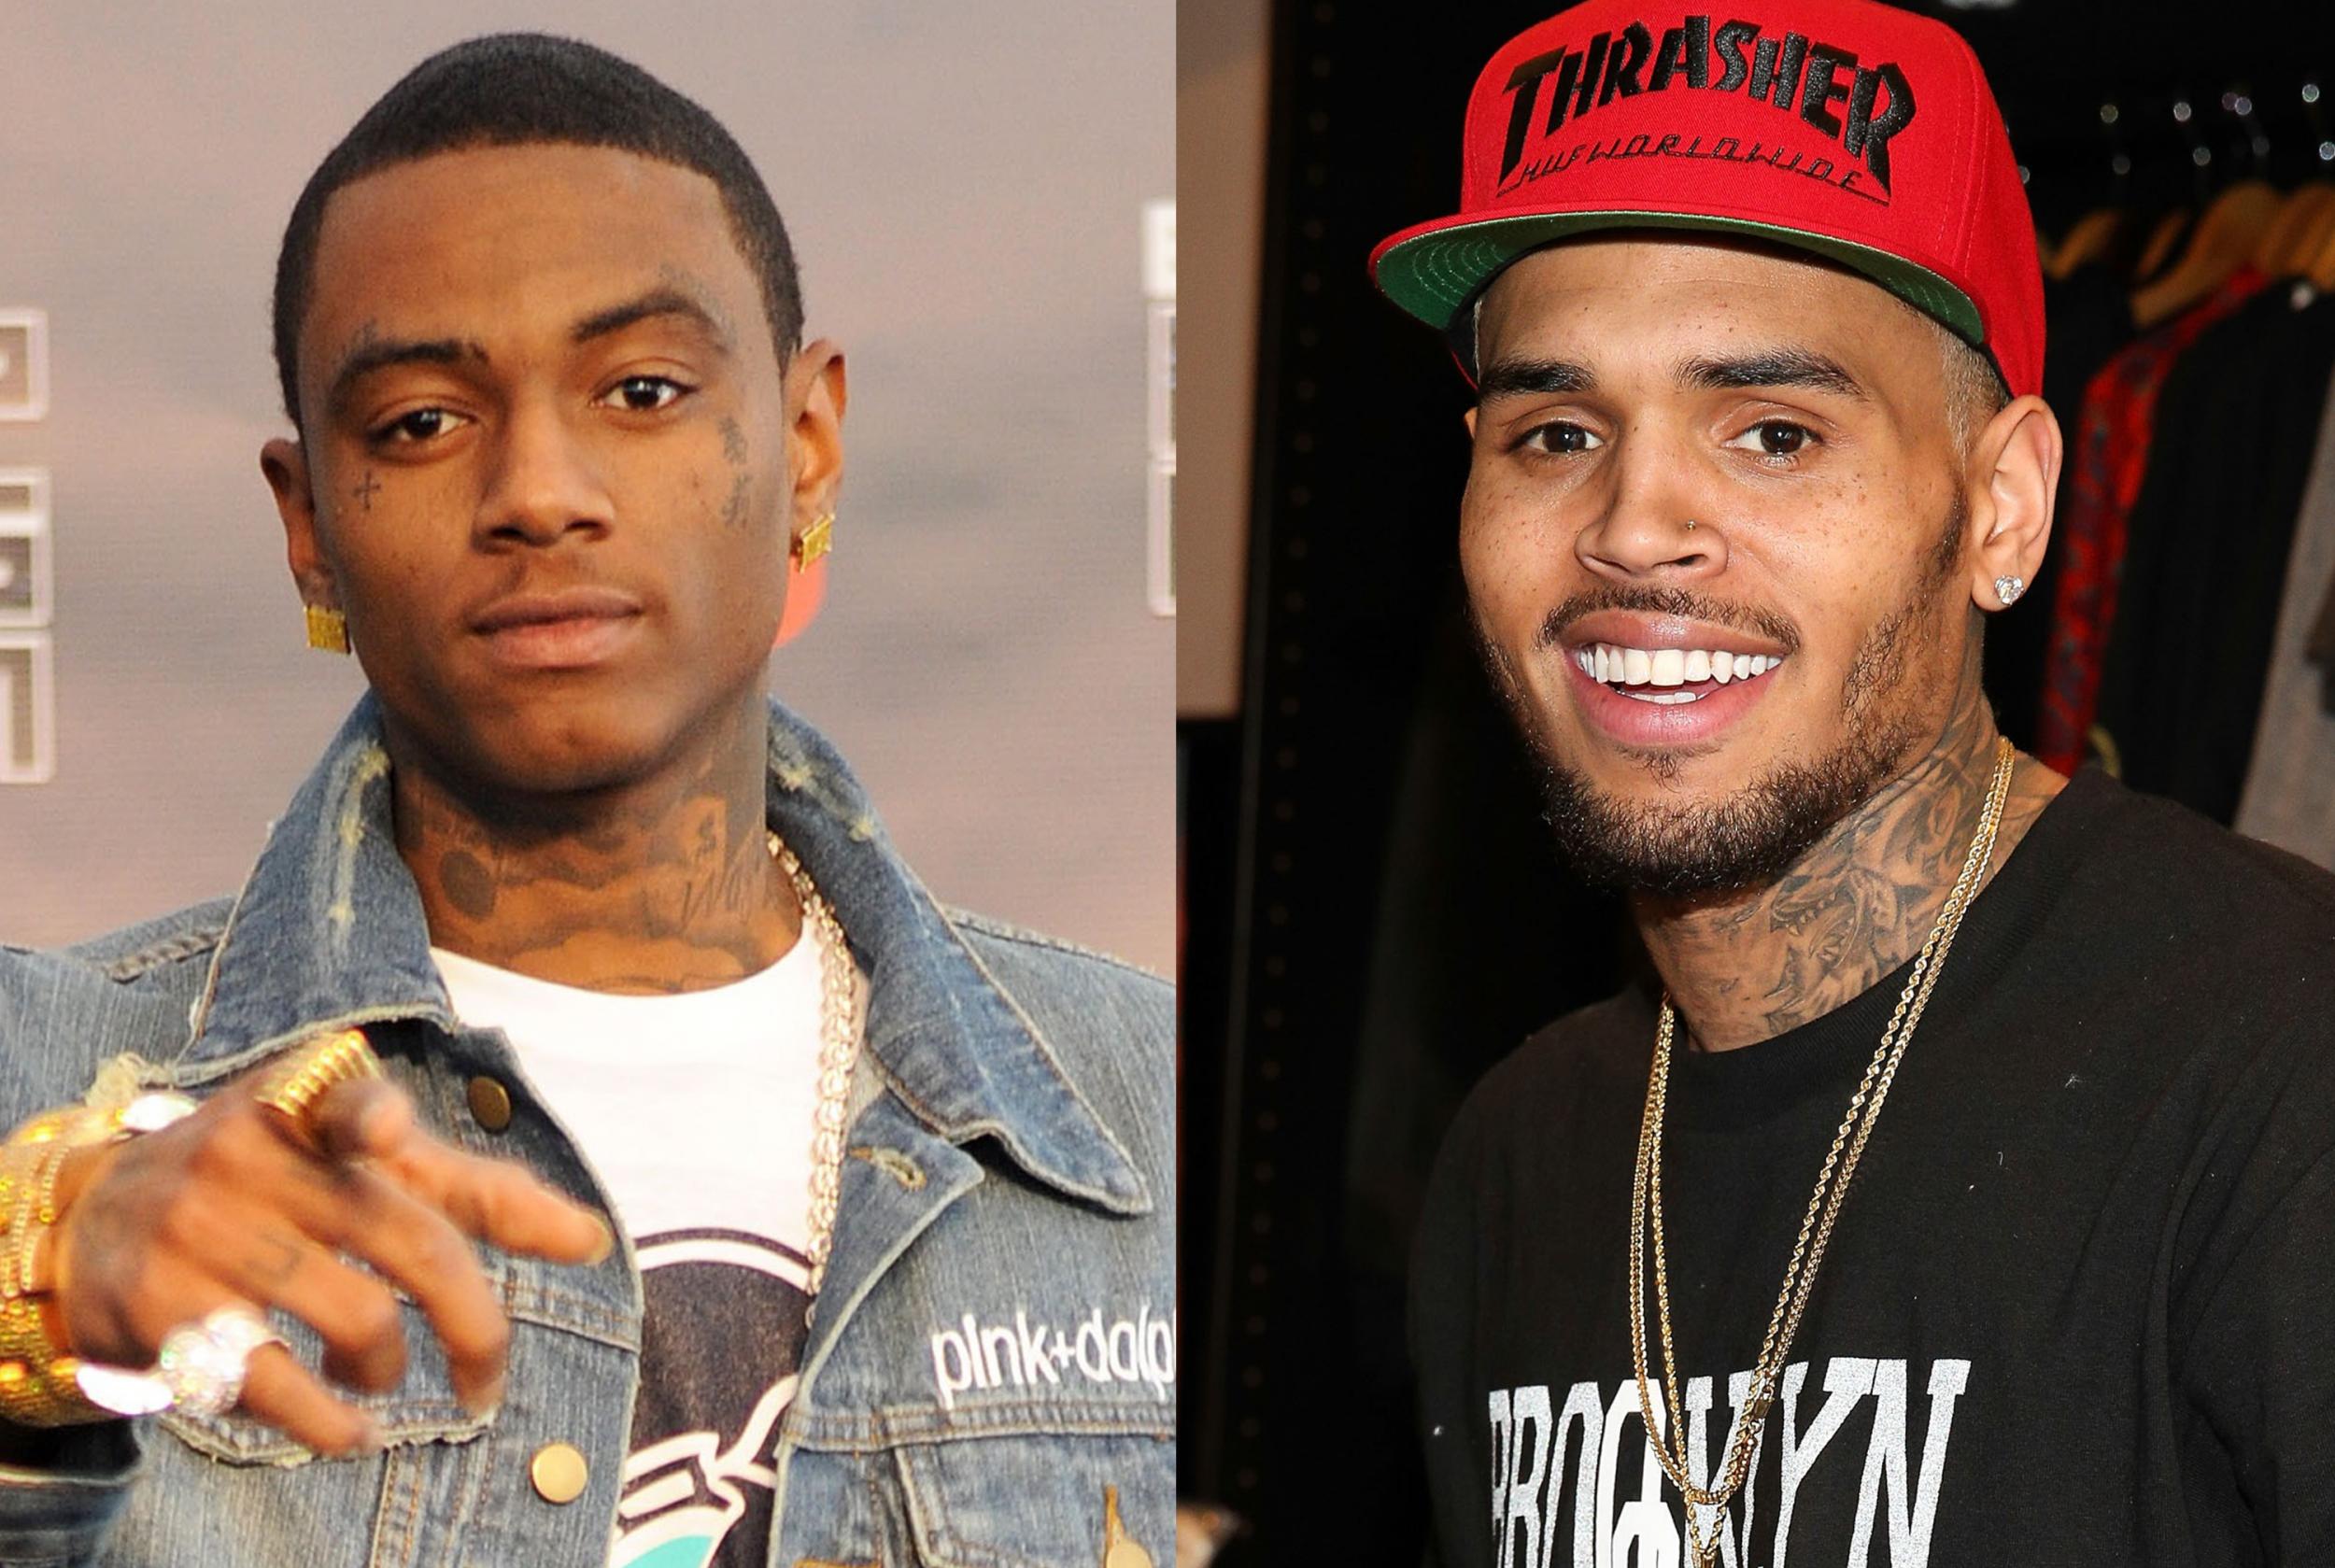 The Independent Chris Brown and Soulja Boy are fighting in a celebrity boxi...